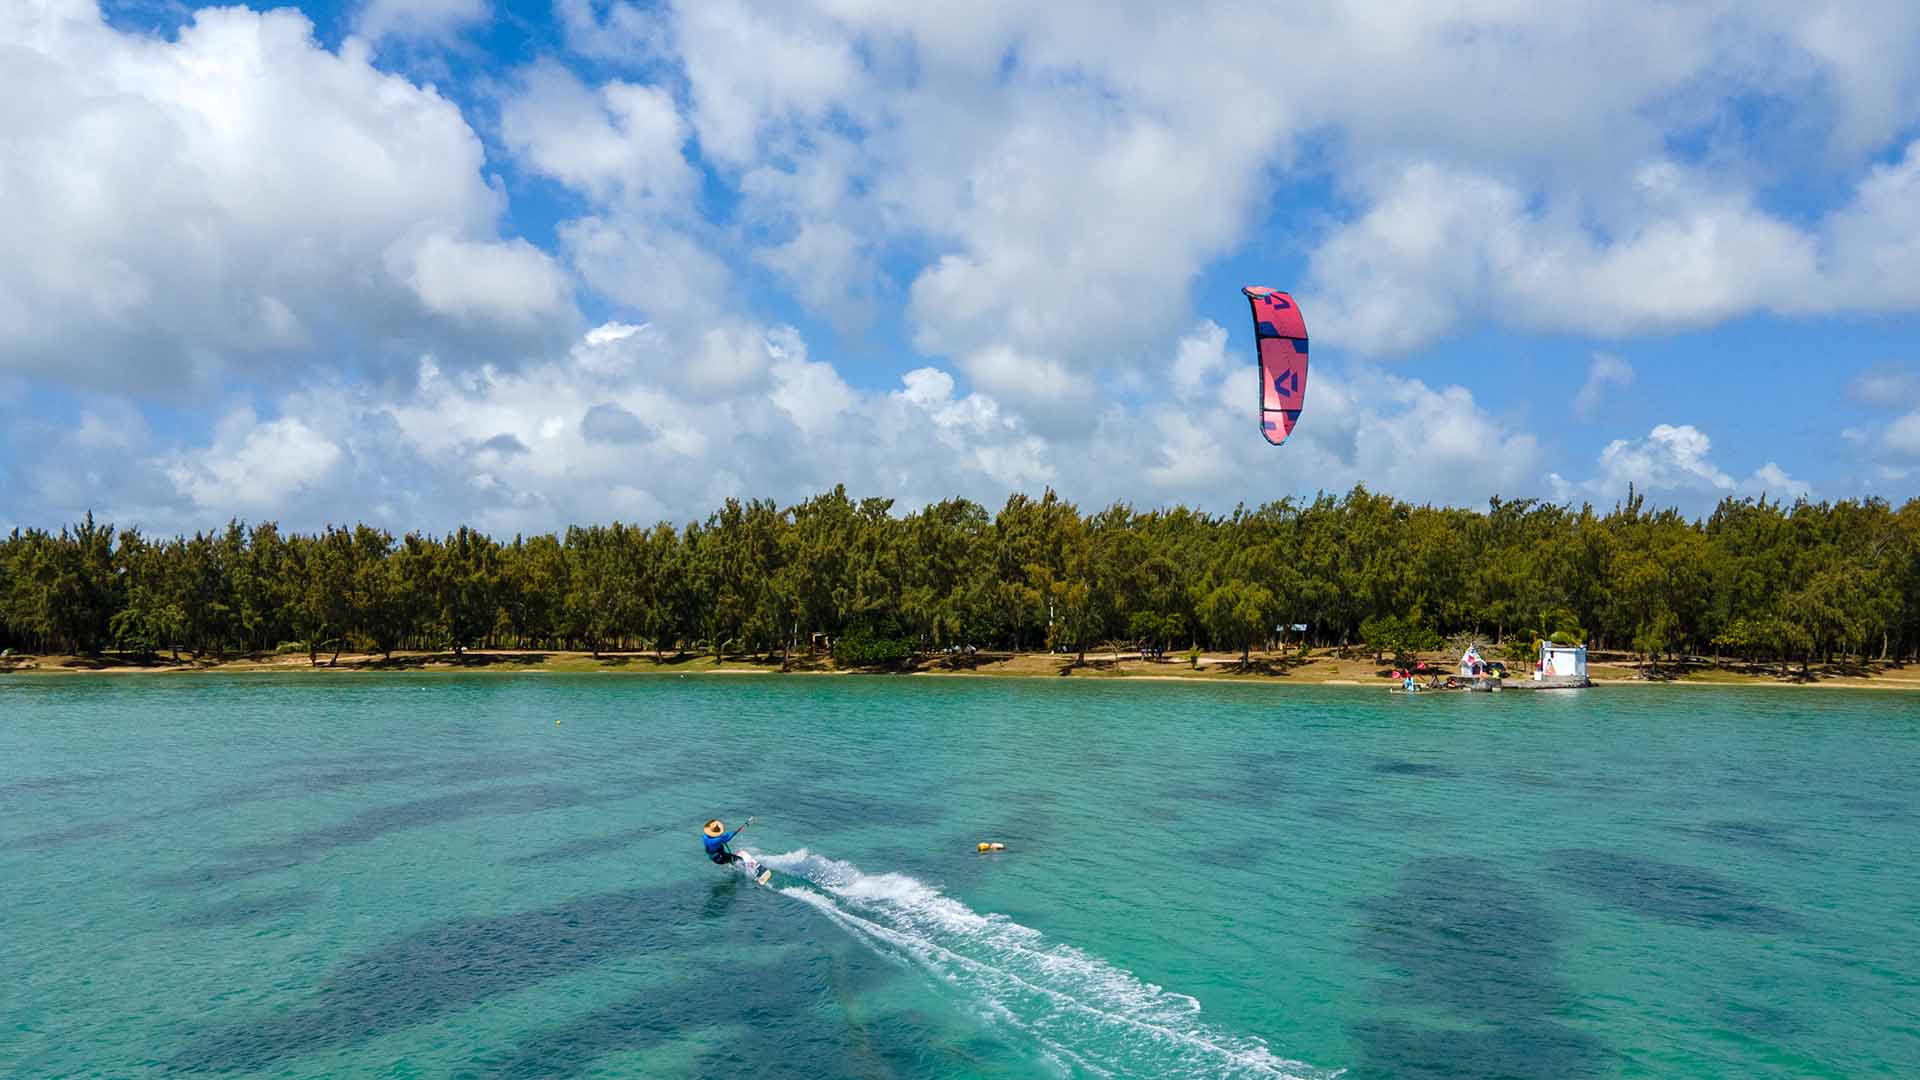 kitesurf and wingfoil spot in mauritius